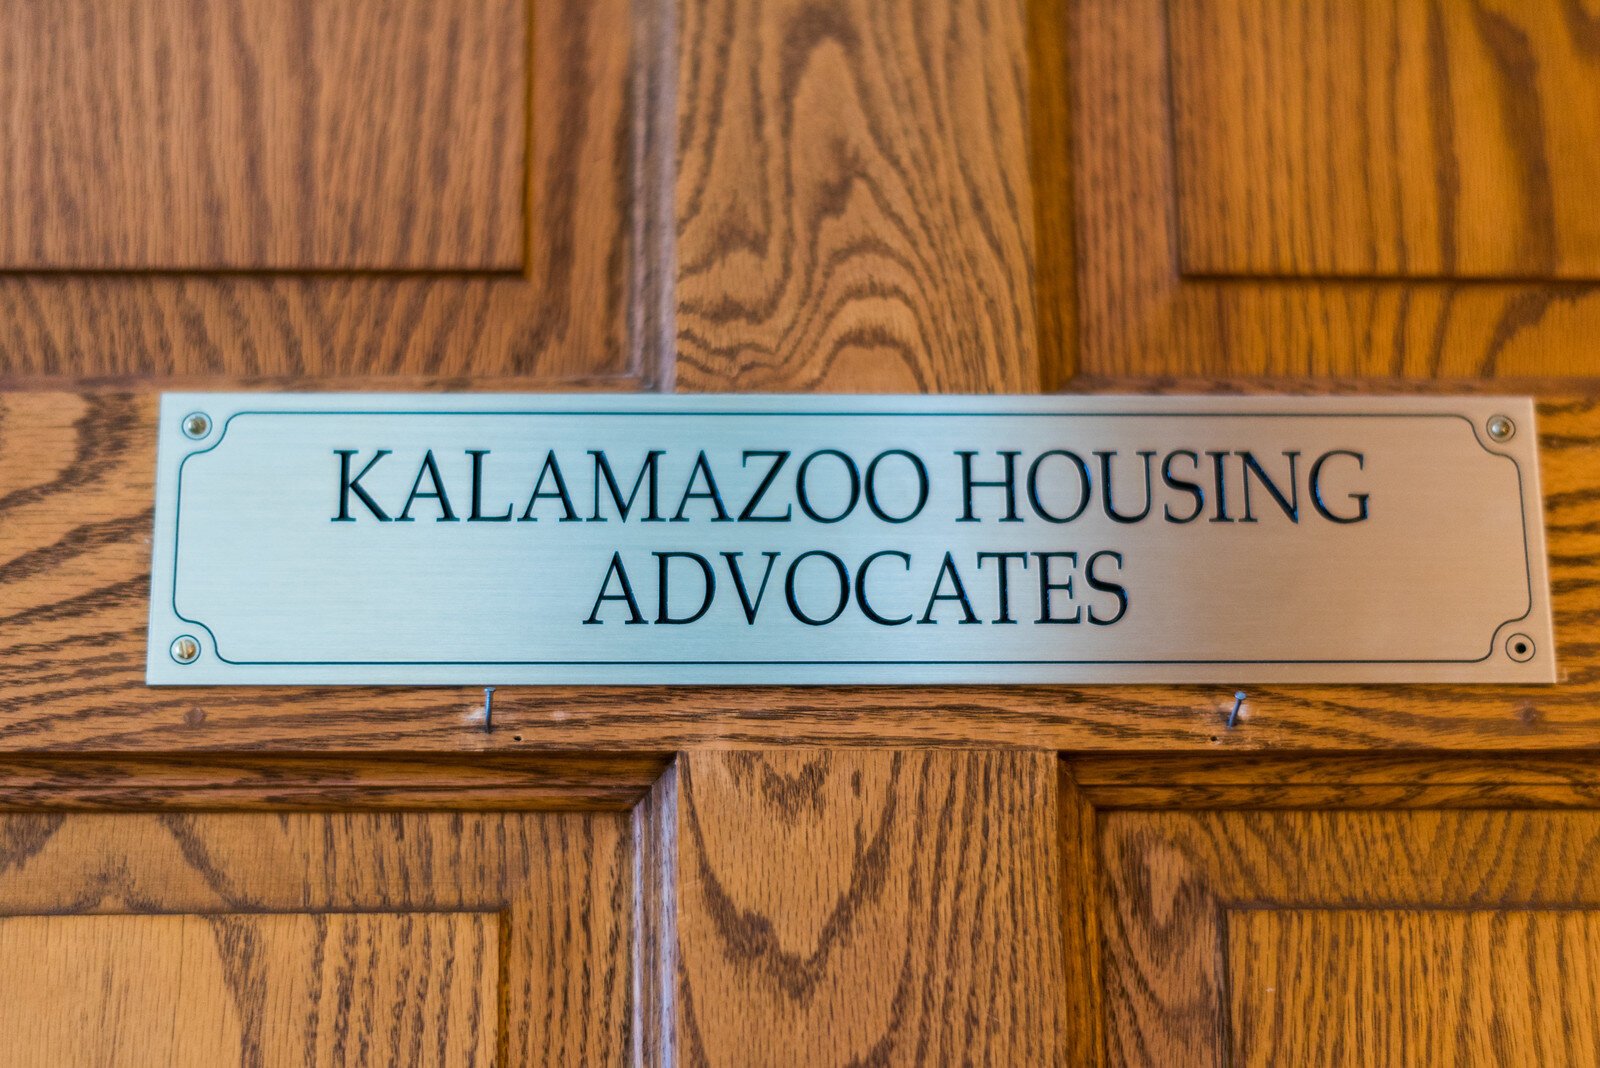 A sign on the door that let's people know they've reached Kalamazoo Housing Advocates.